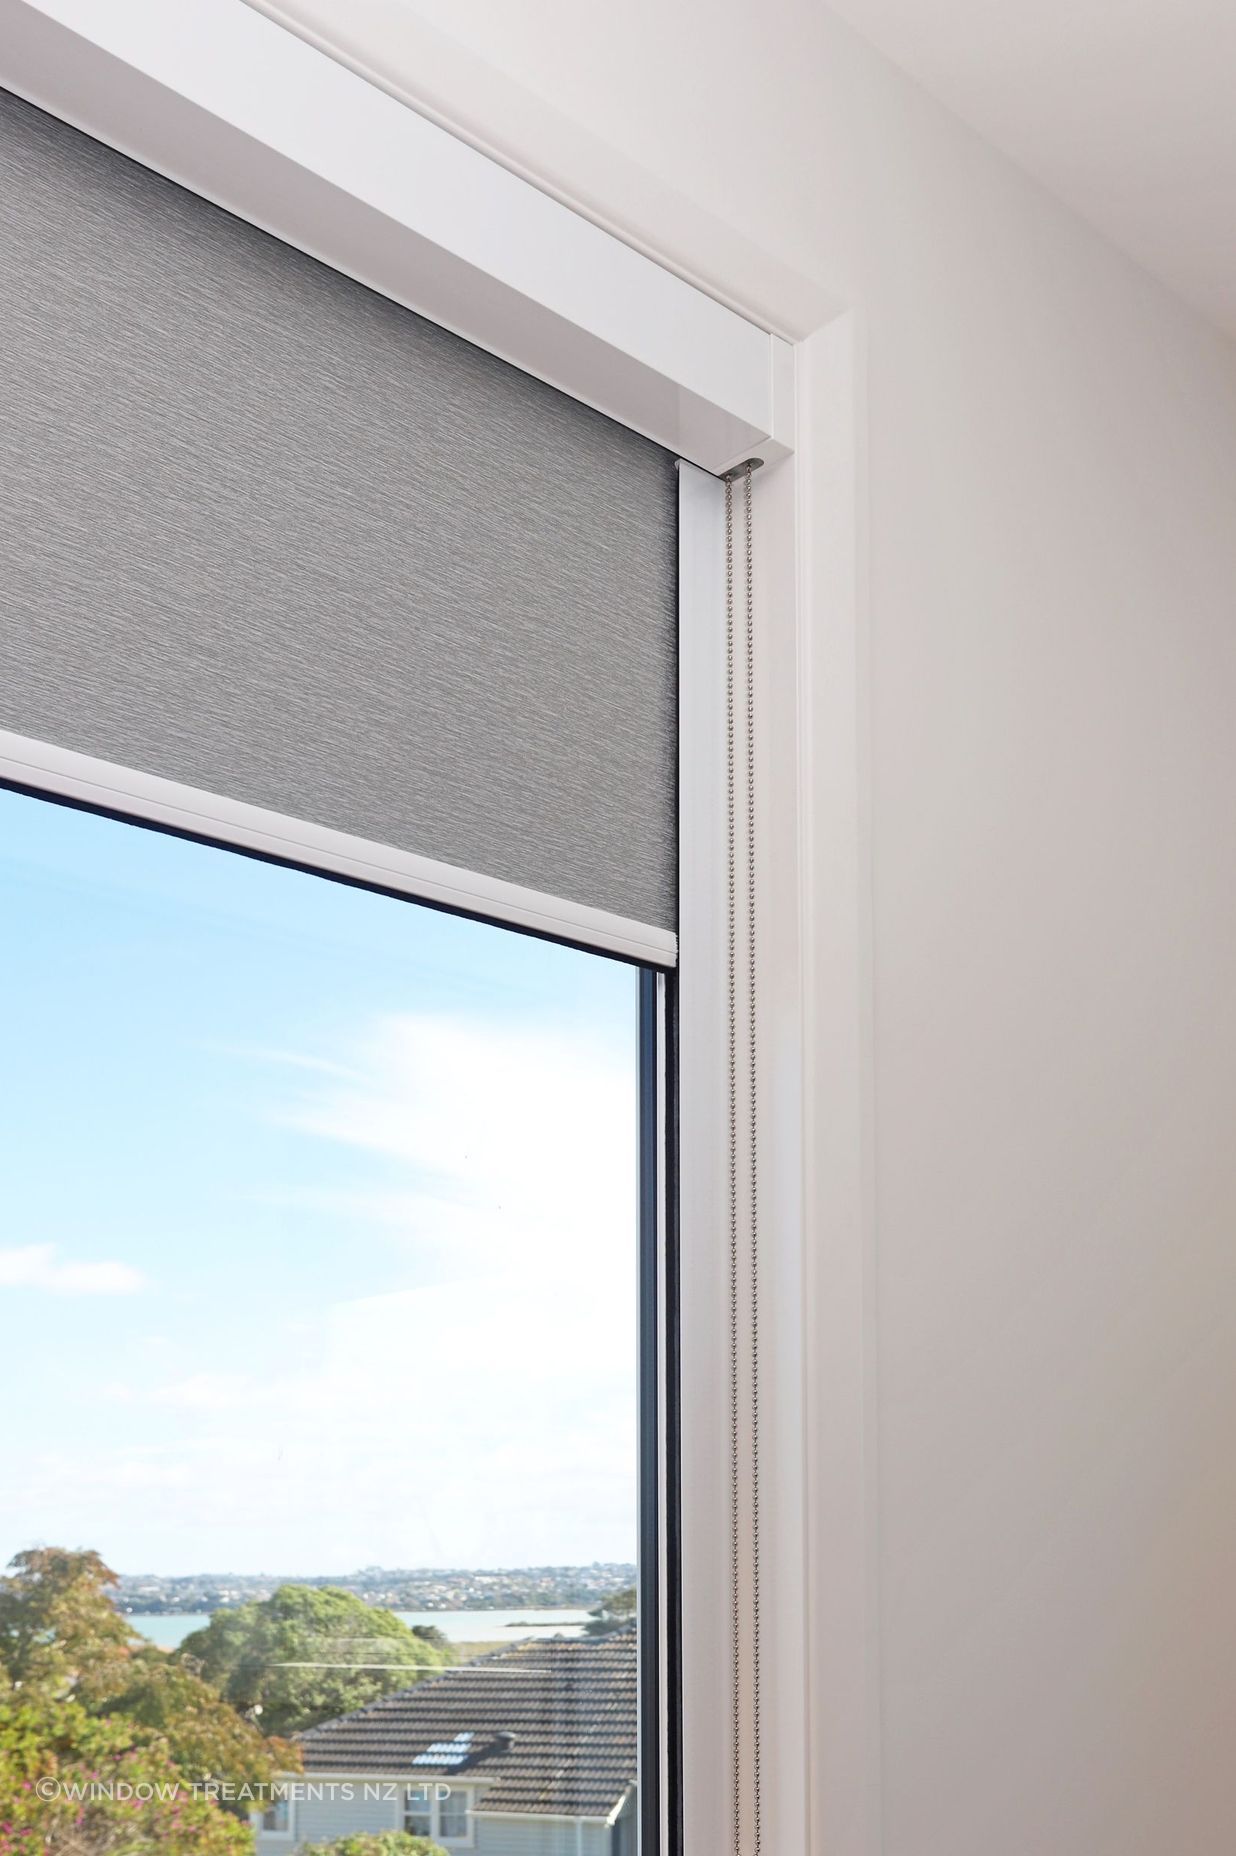 Blocco Roller Blinds have side channels fitted to the window frame for great light control.